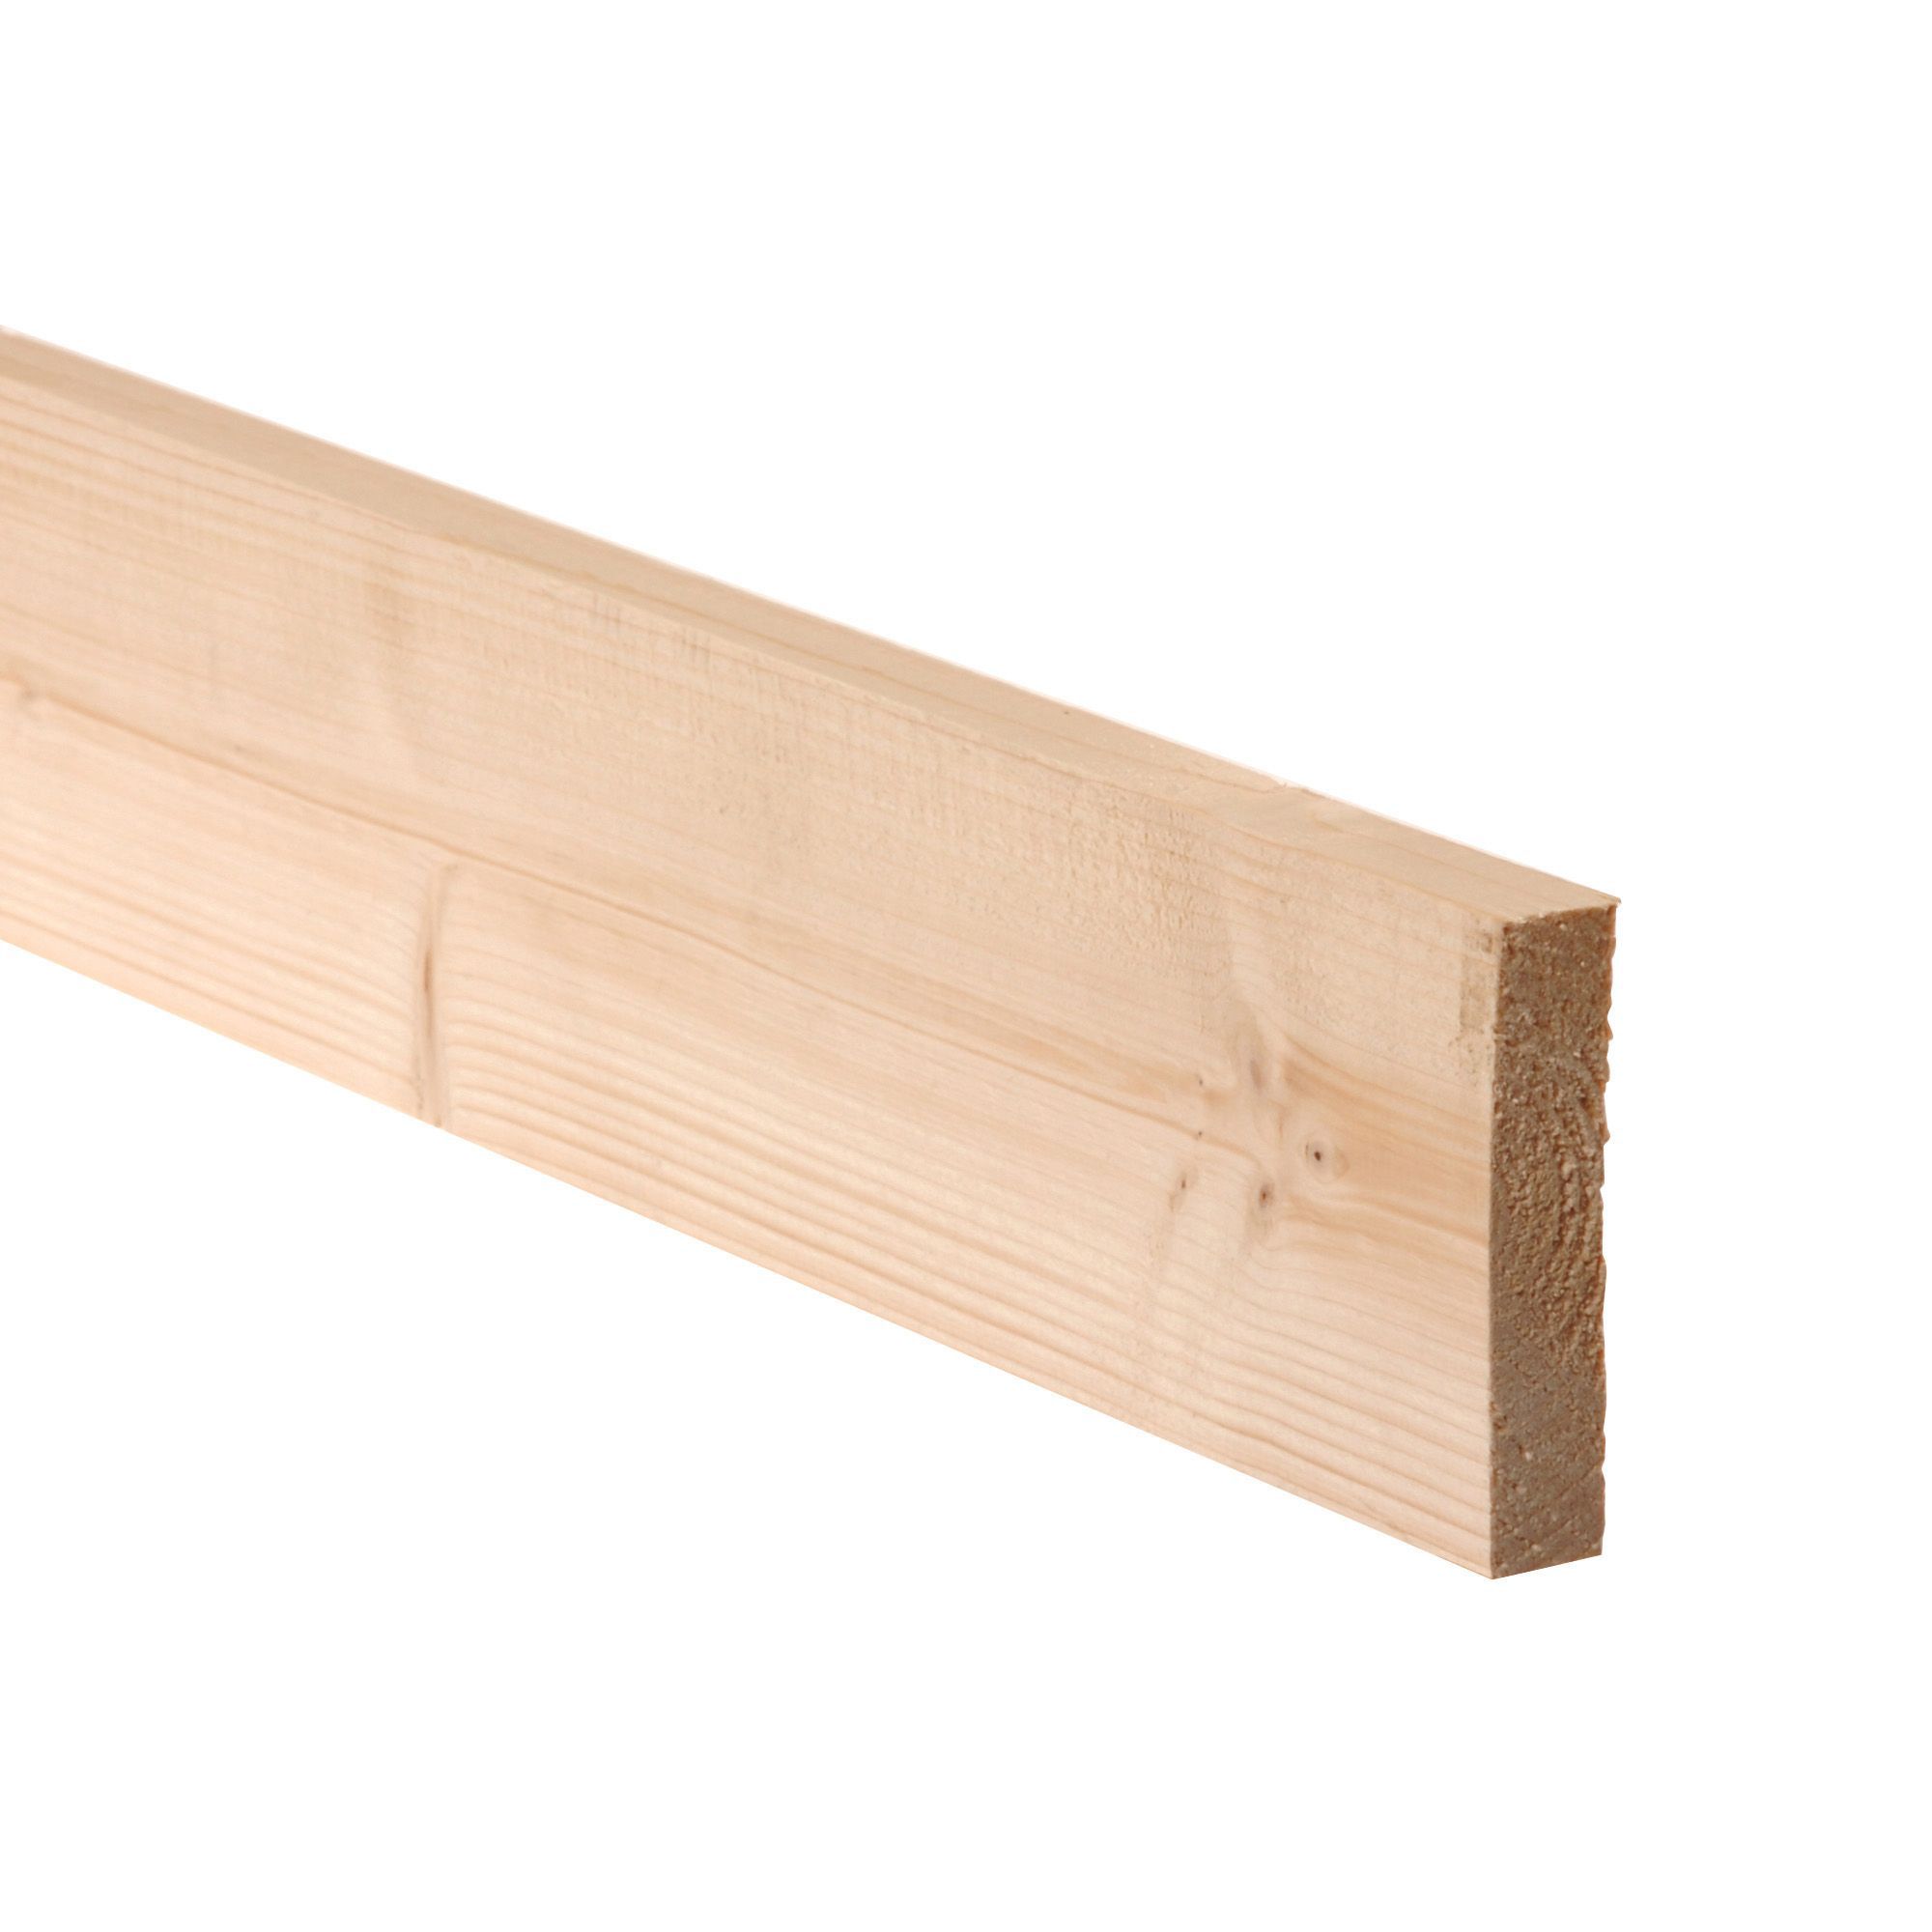 Smooth Planed Square edge Spruce Timber (L)2.1m (W)131mm (T)28mm 253259, Pack of 6